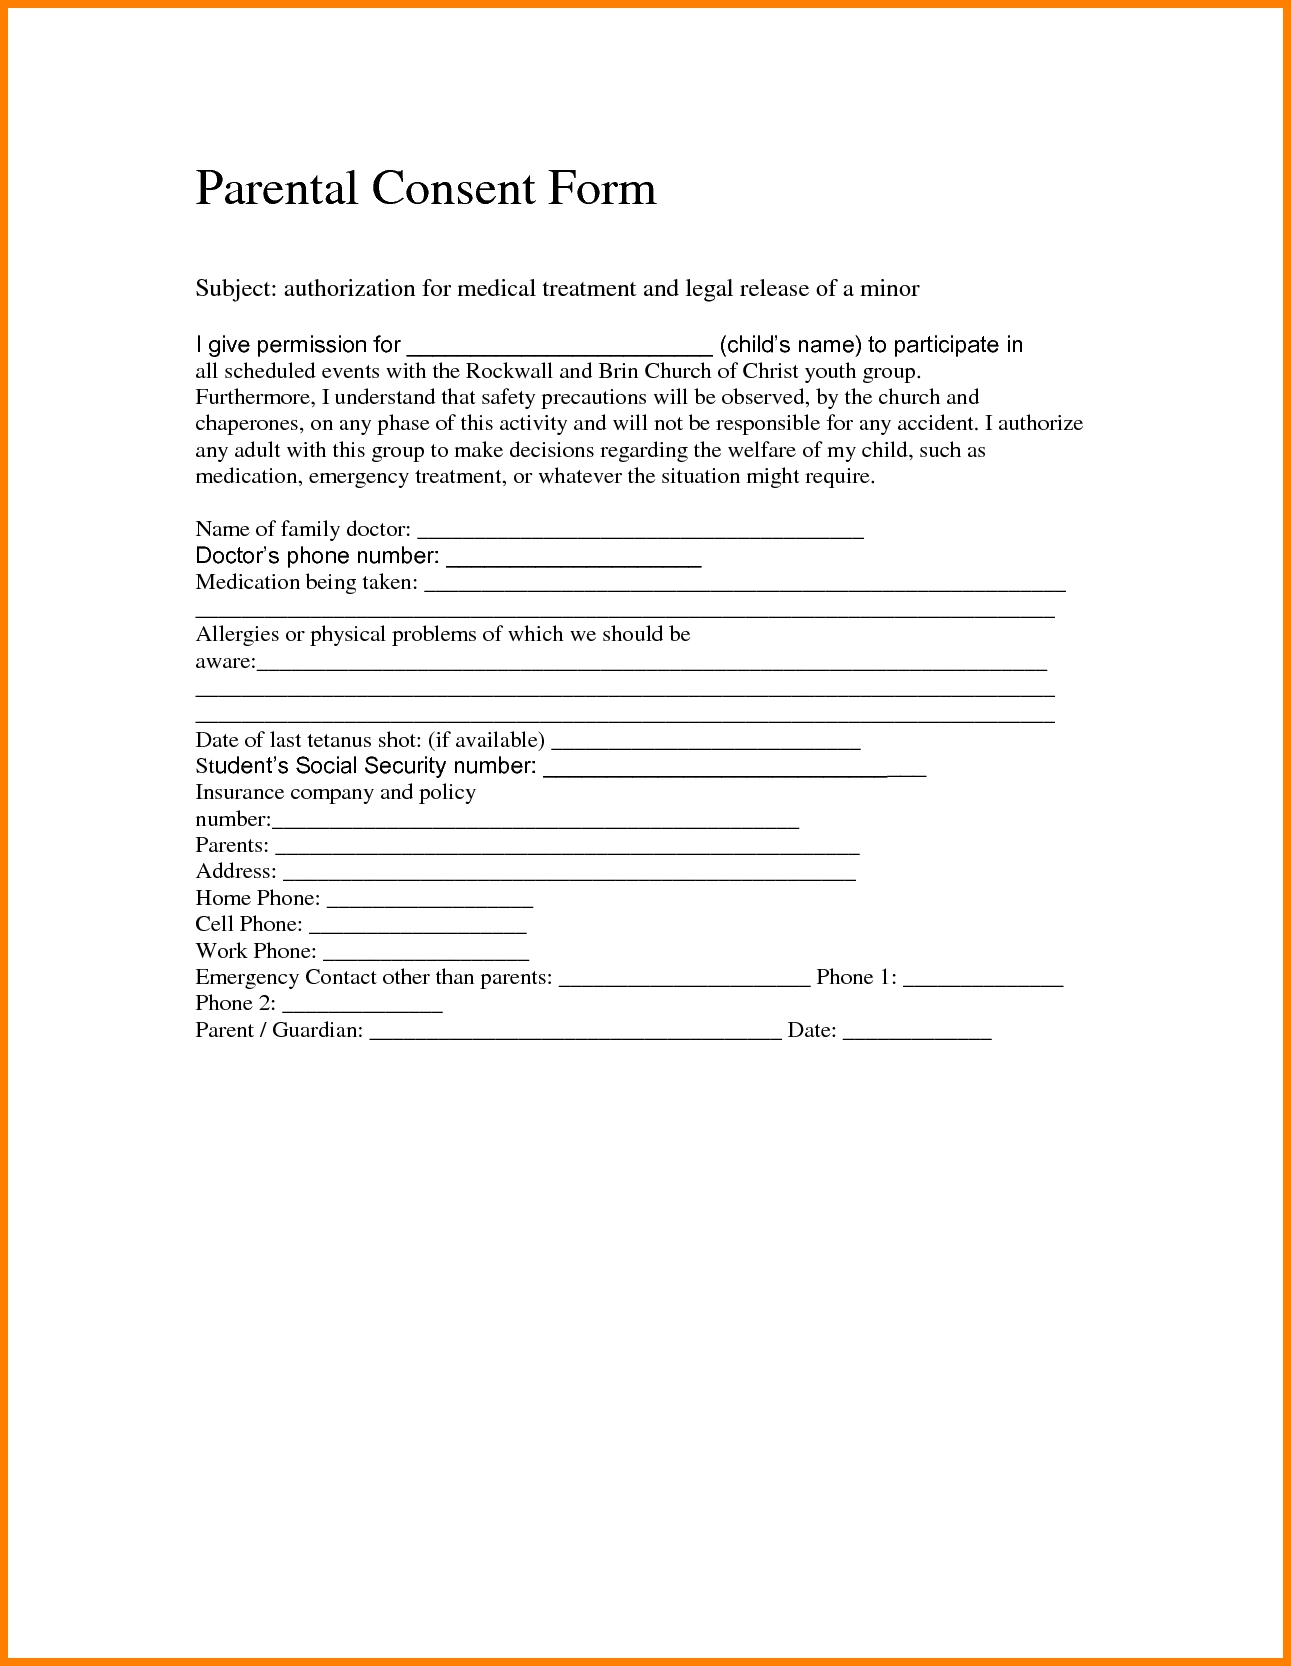 Medical Consent Letter for Grandparents Template - Contemporary Parent Consent forms Vignette Administrative Ficer